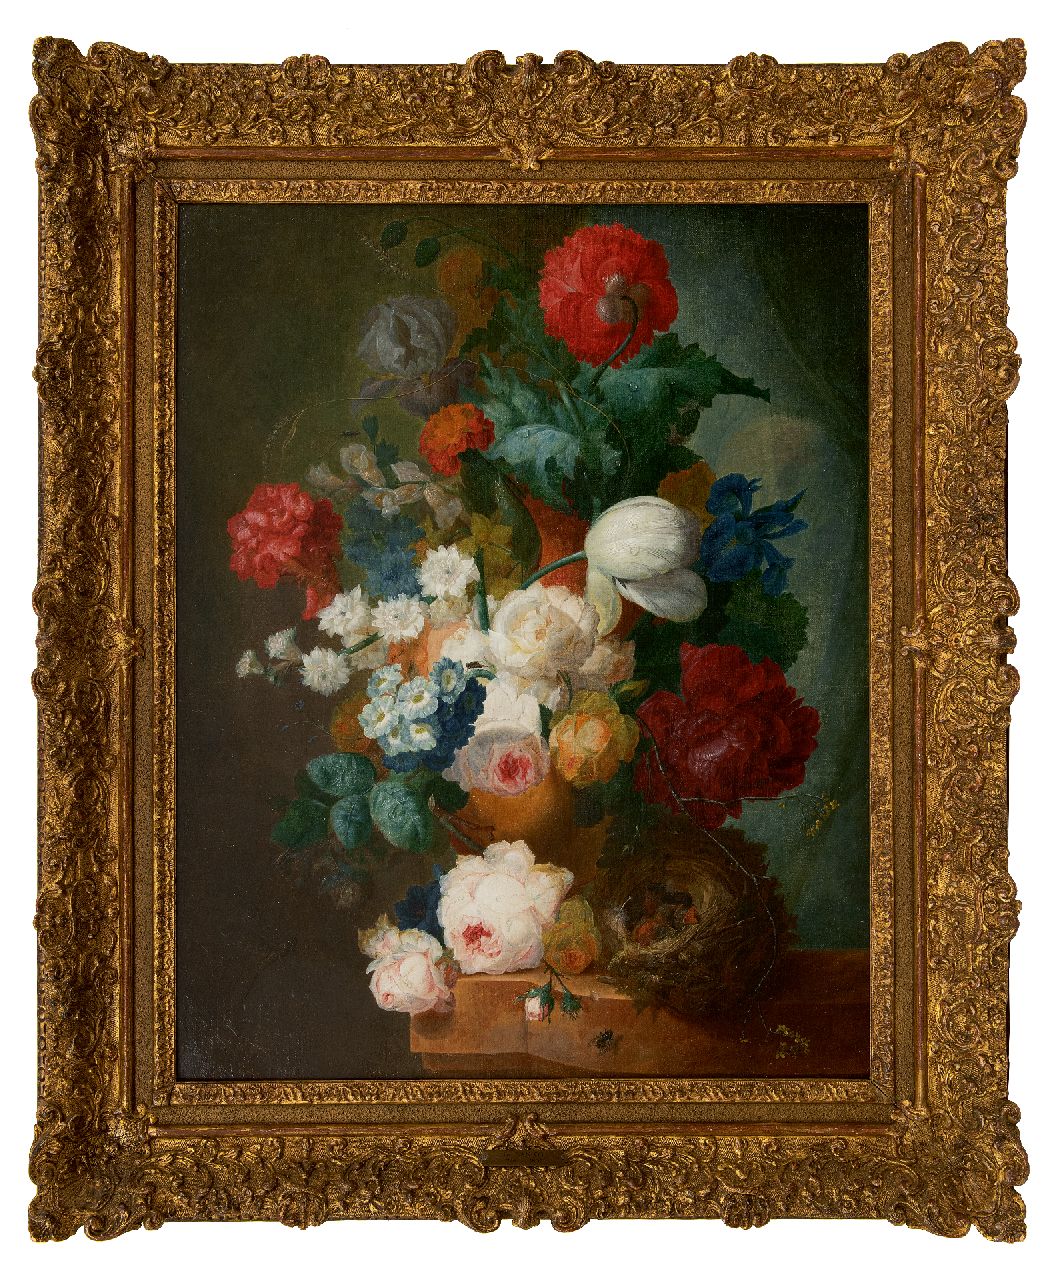 Os J. van | Jan van Os | Paintings offered for sale | Still life with roses, poppies and bird's nest, oil on canvas 66.3 x 55.0 cm, signed l.l. (bears feaded  signature)